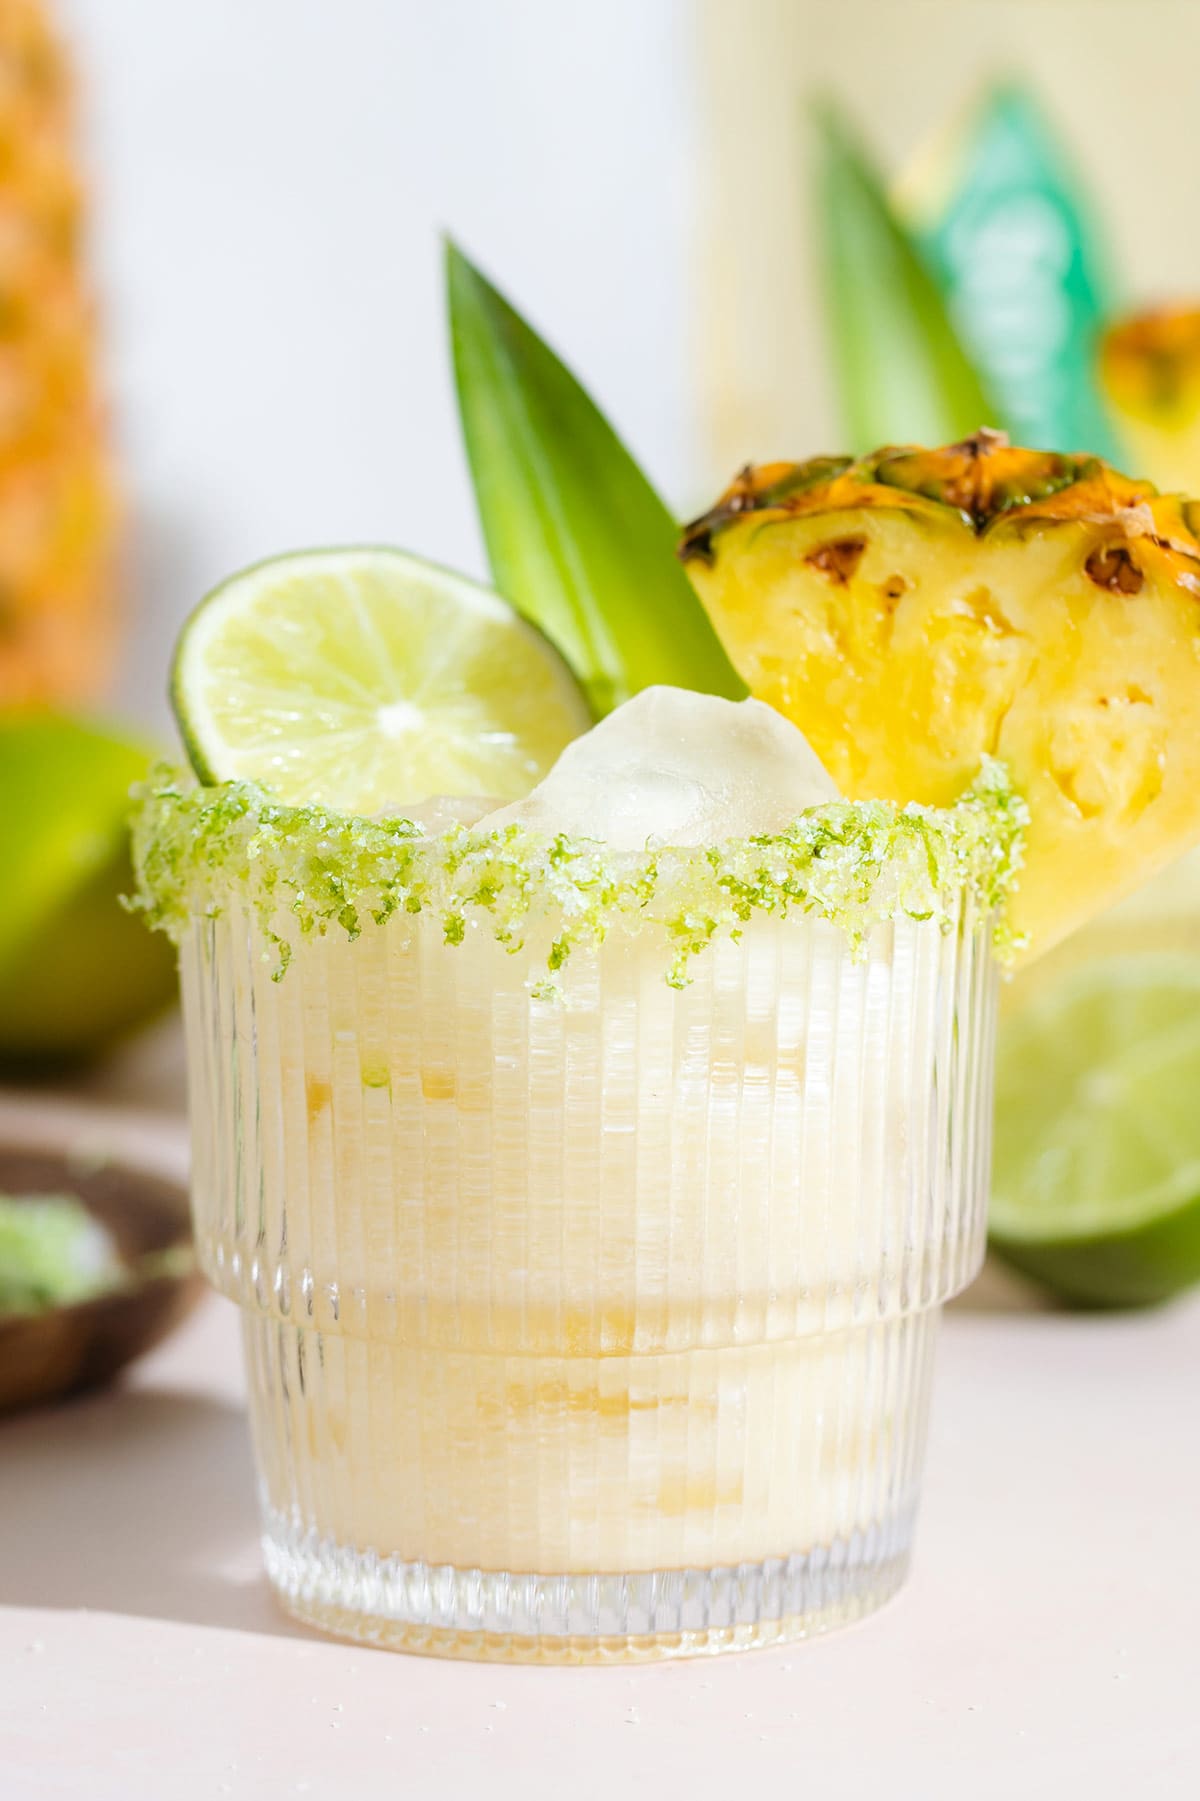 Pineapple coconut margarita in a short glass with salt and lime zest on the rim garnished with a slice of pineapple, a pineapple leaf, and lime.